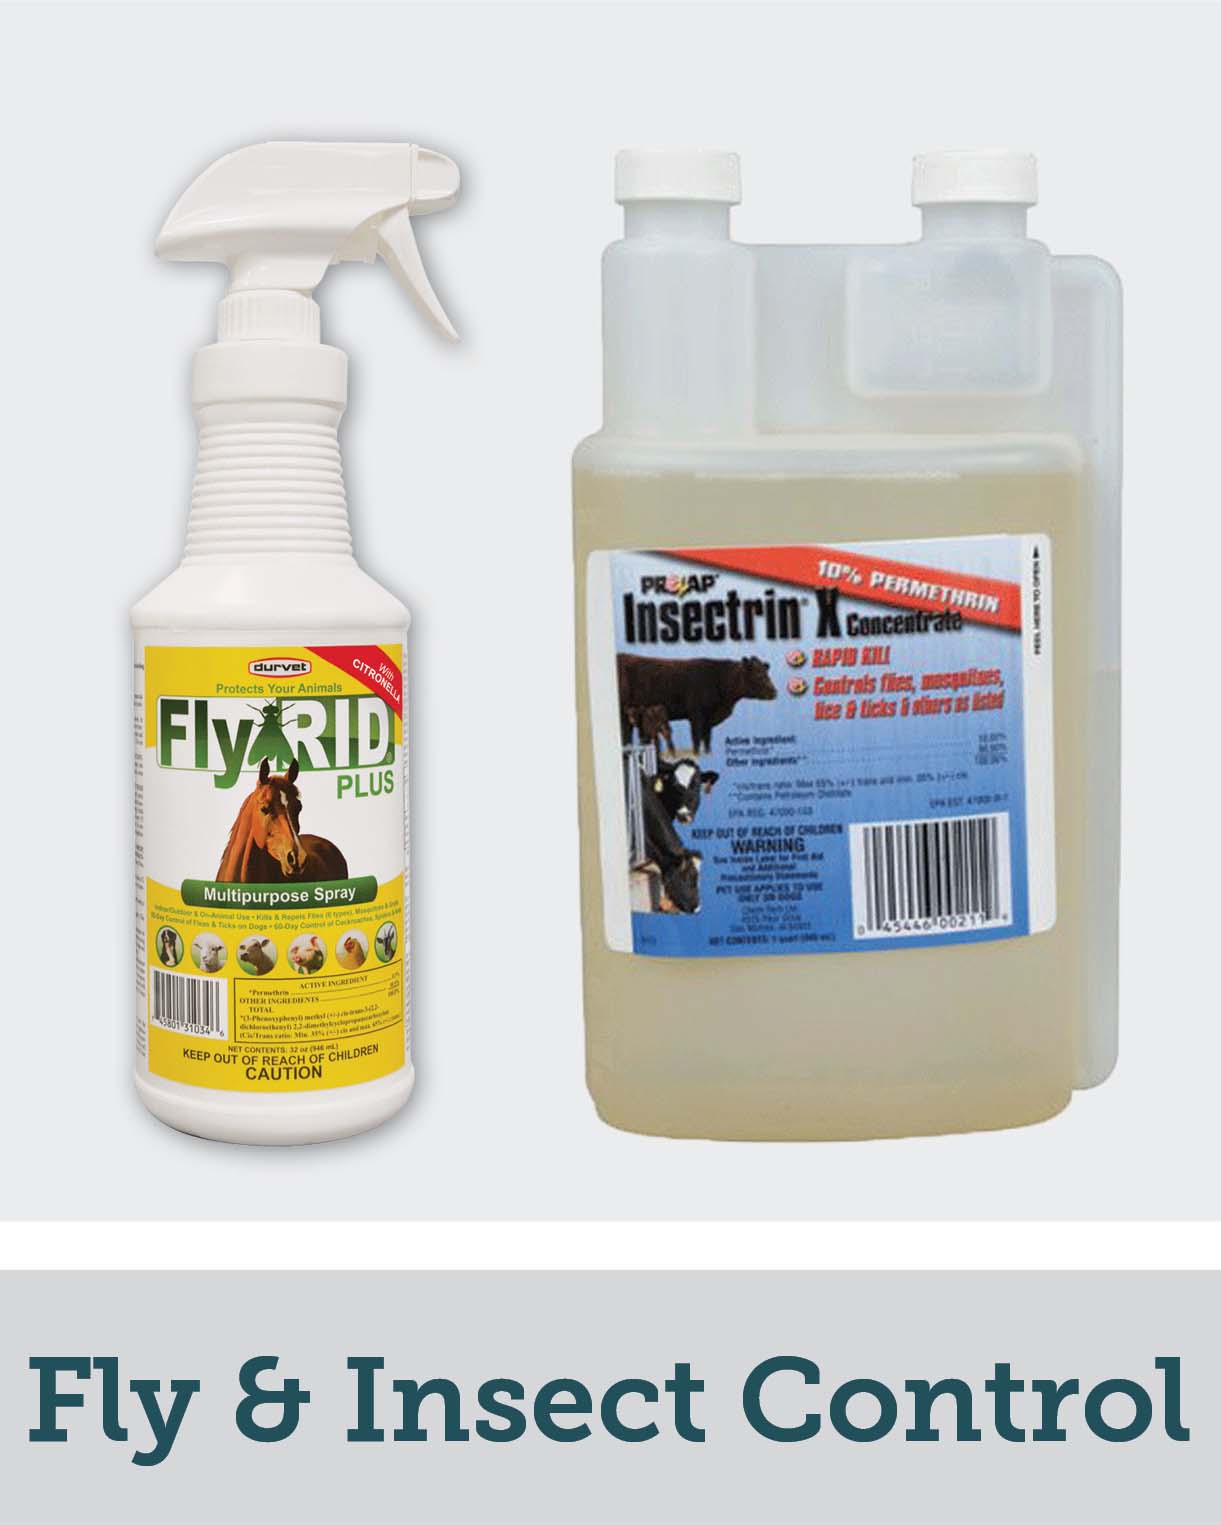 Essentials, Fly & Insect Control, Opens in new window.